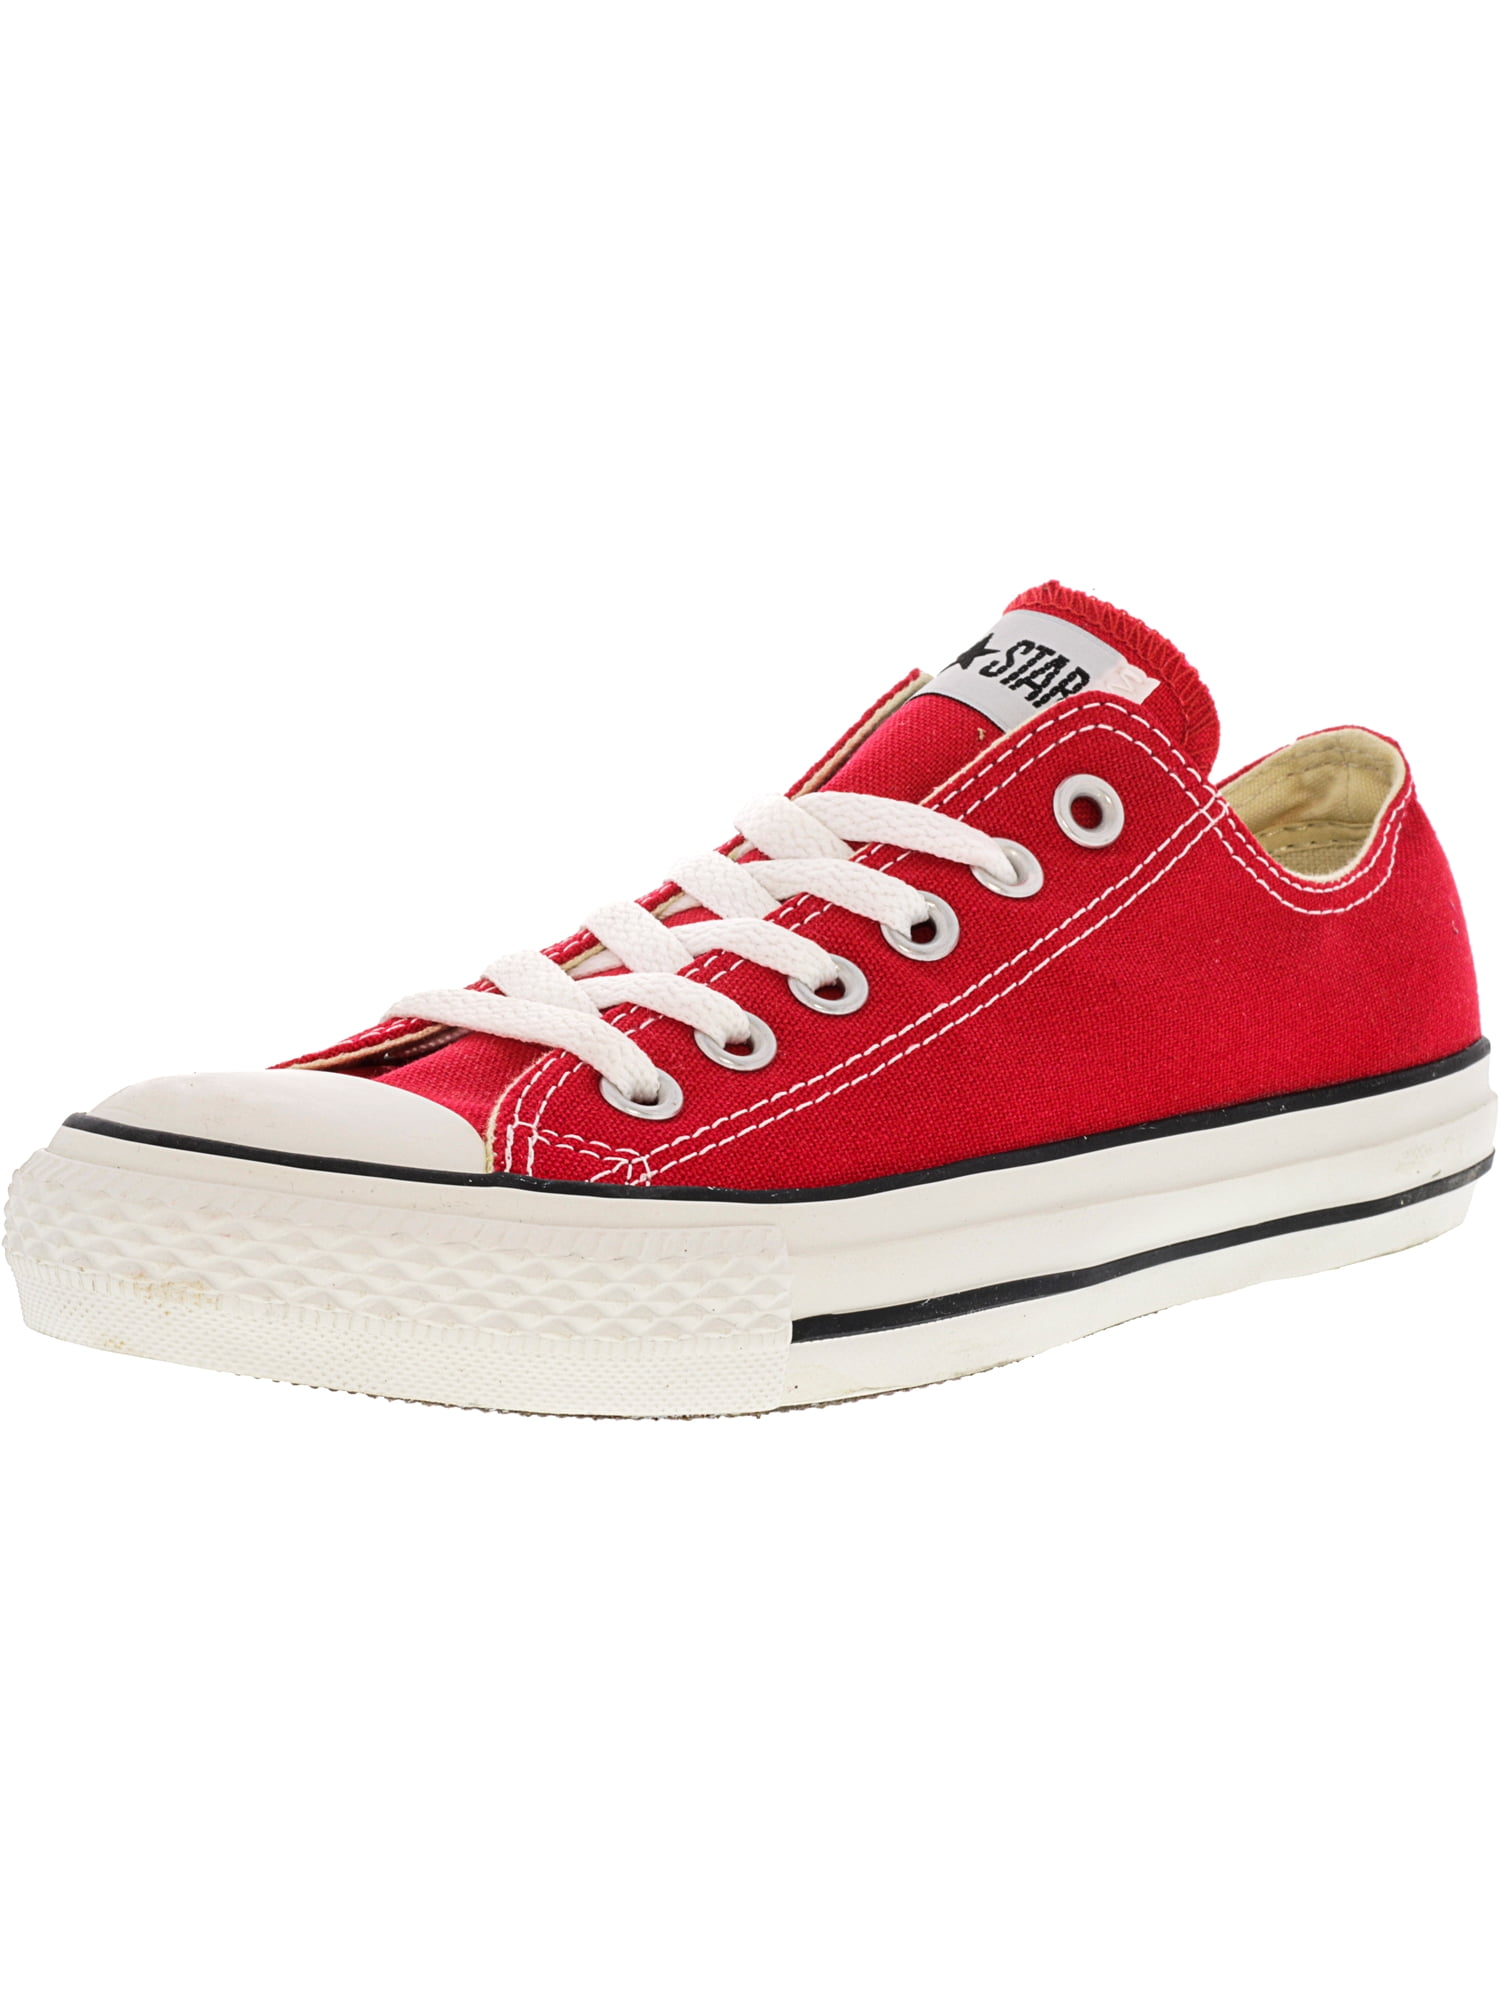 Regnskab solid Produktion Converse Chuck Taylor All Star Ox Red Ankle-High Fashion Sneaker - 13M /  11M - Walmart.com